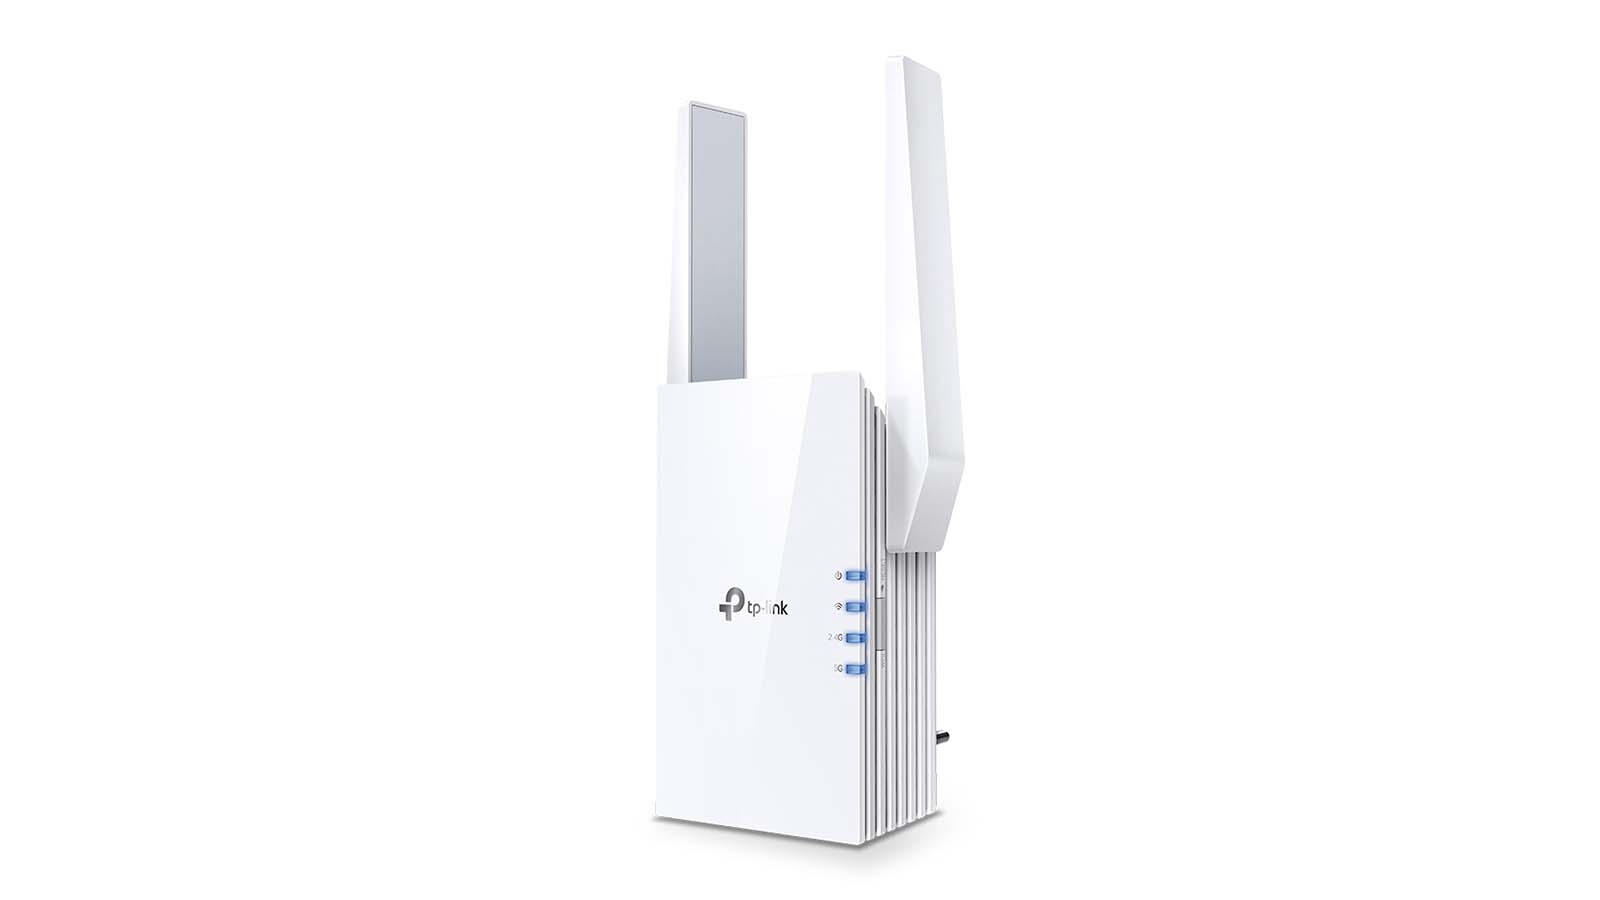 TP-Link N300 WiFi Extender (TL-WA855RE) - WiFi Range Extender, up to  300Mbps Speed, Wireless Signal Booster and Access Point, Single Band 2.4GHz  Only 